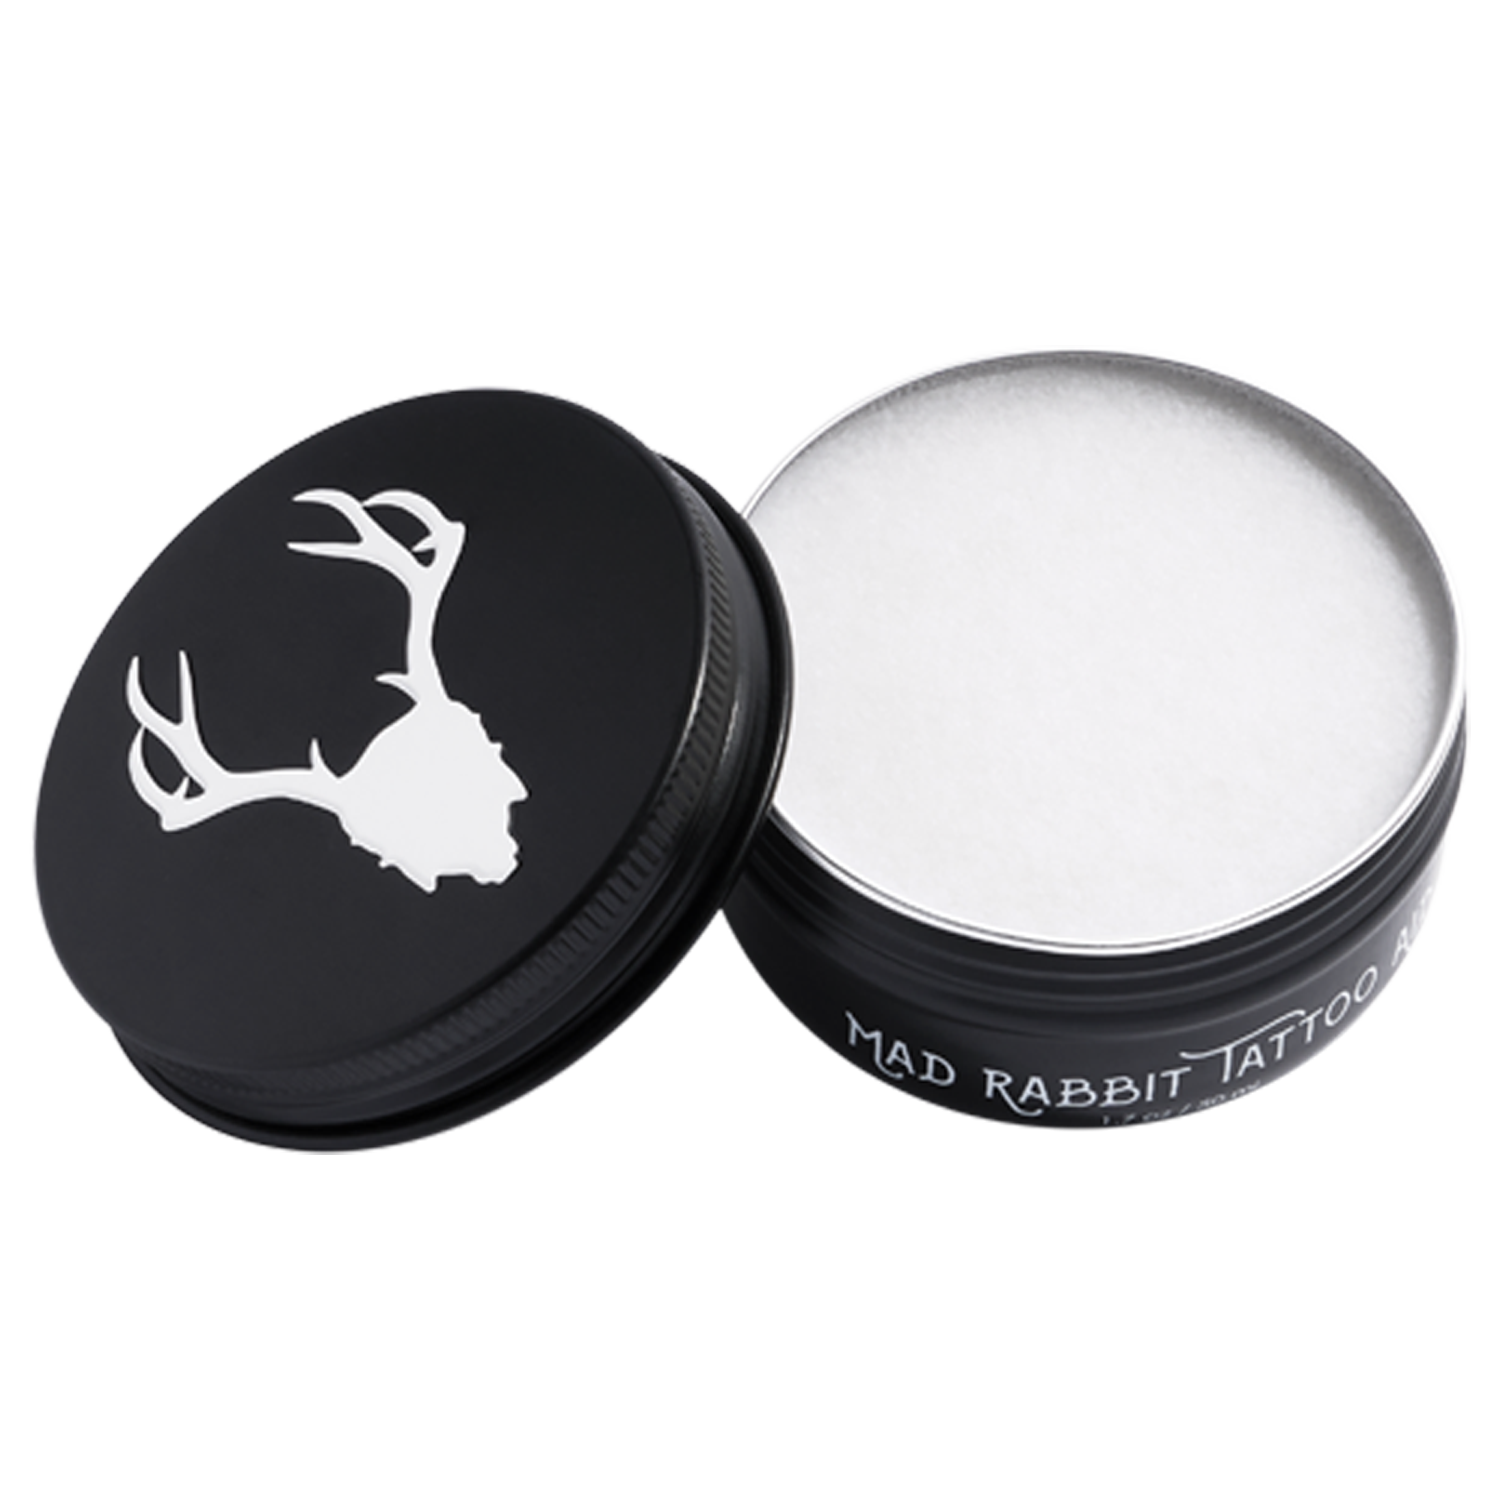 Mad Rabbit Tattoo Balm & Aftercare Cream - Lotion For Color Enhancement 2.  6695224327466   eBay